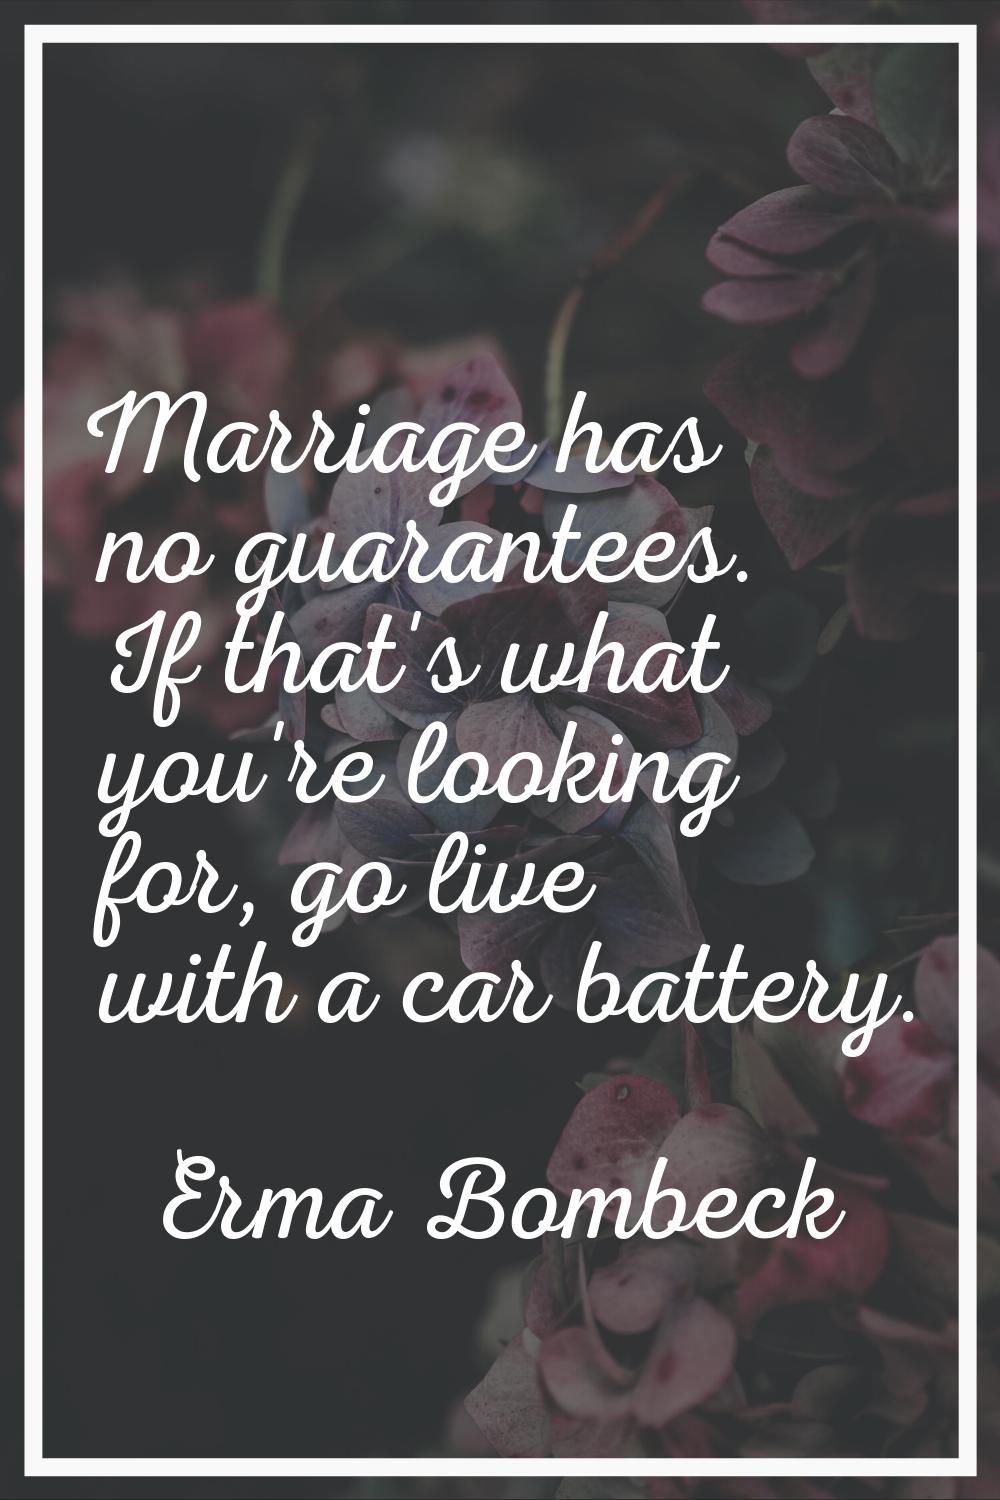 Marriage has no guarantees. If that's what you're looking for, go live with a car battery.